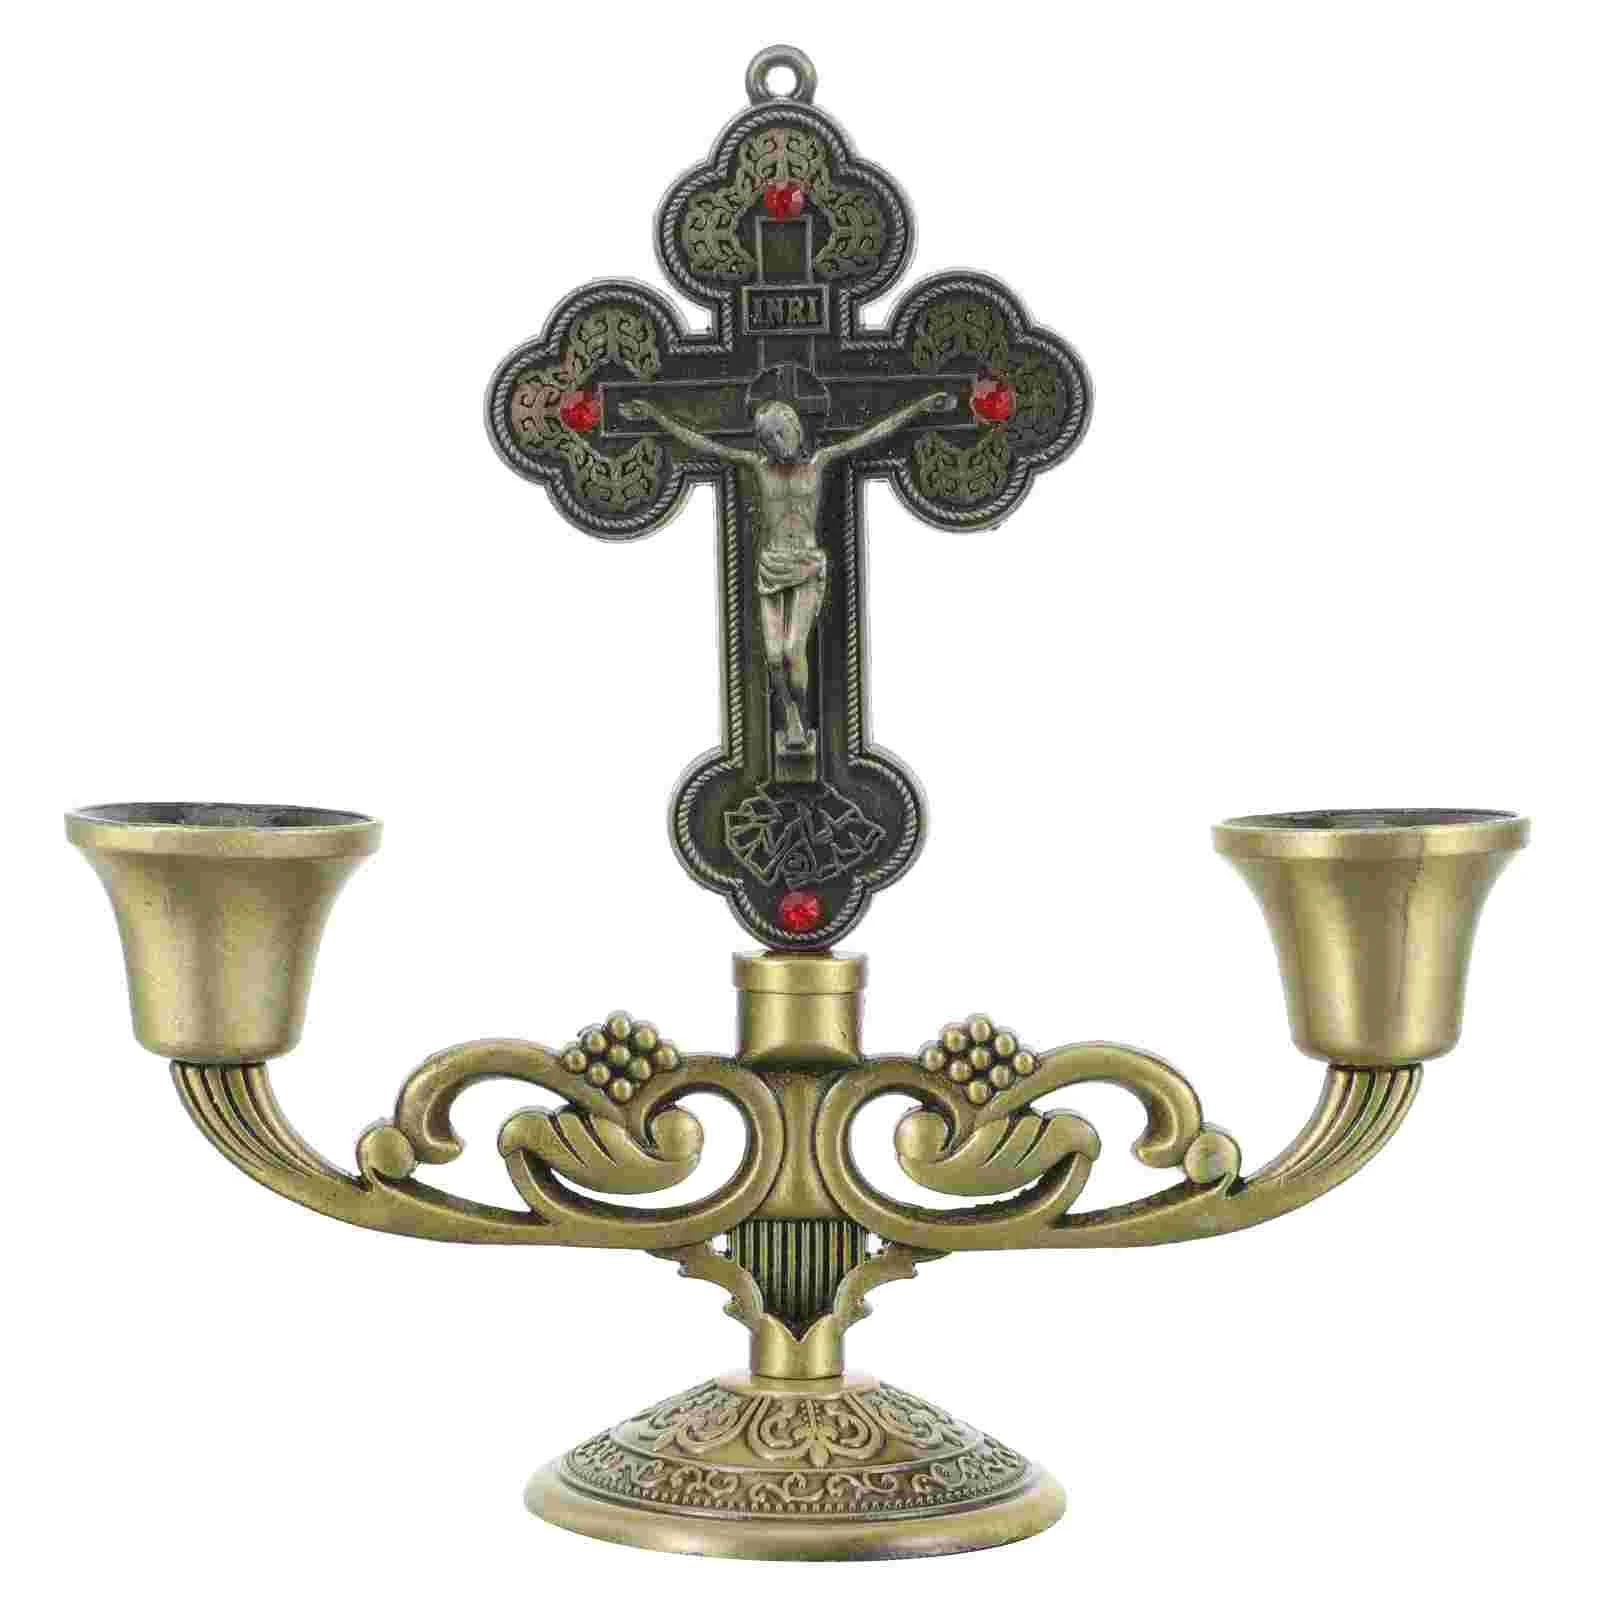 

Holy Stand Cone Holder Tea Light Candlestick Table Centerpiece Vintage Decor Alloy Retro